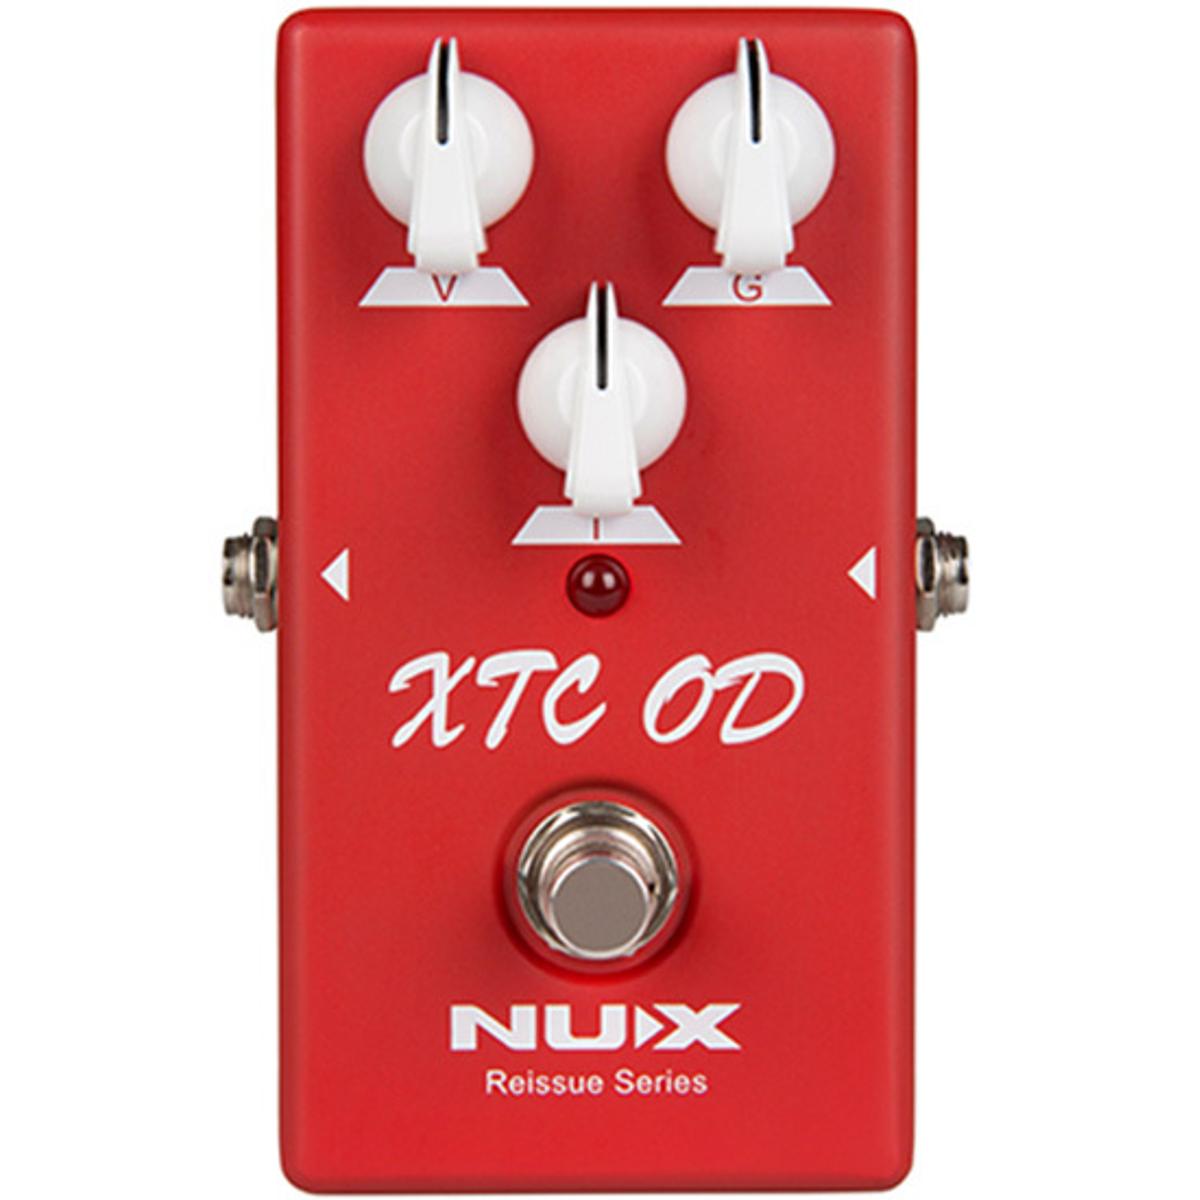 NU-X-NXXTCODRIVE-Reissue-Series-XTC-Overdrive-Effect-Pedal